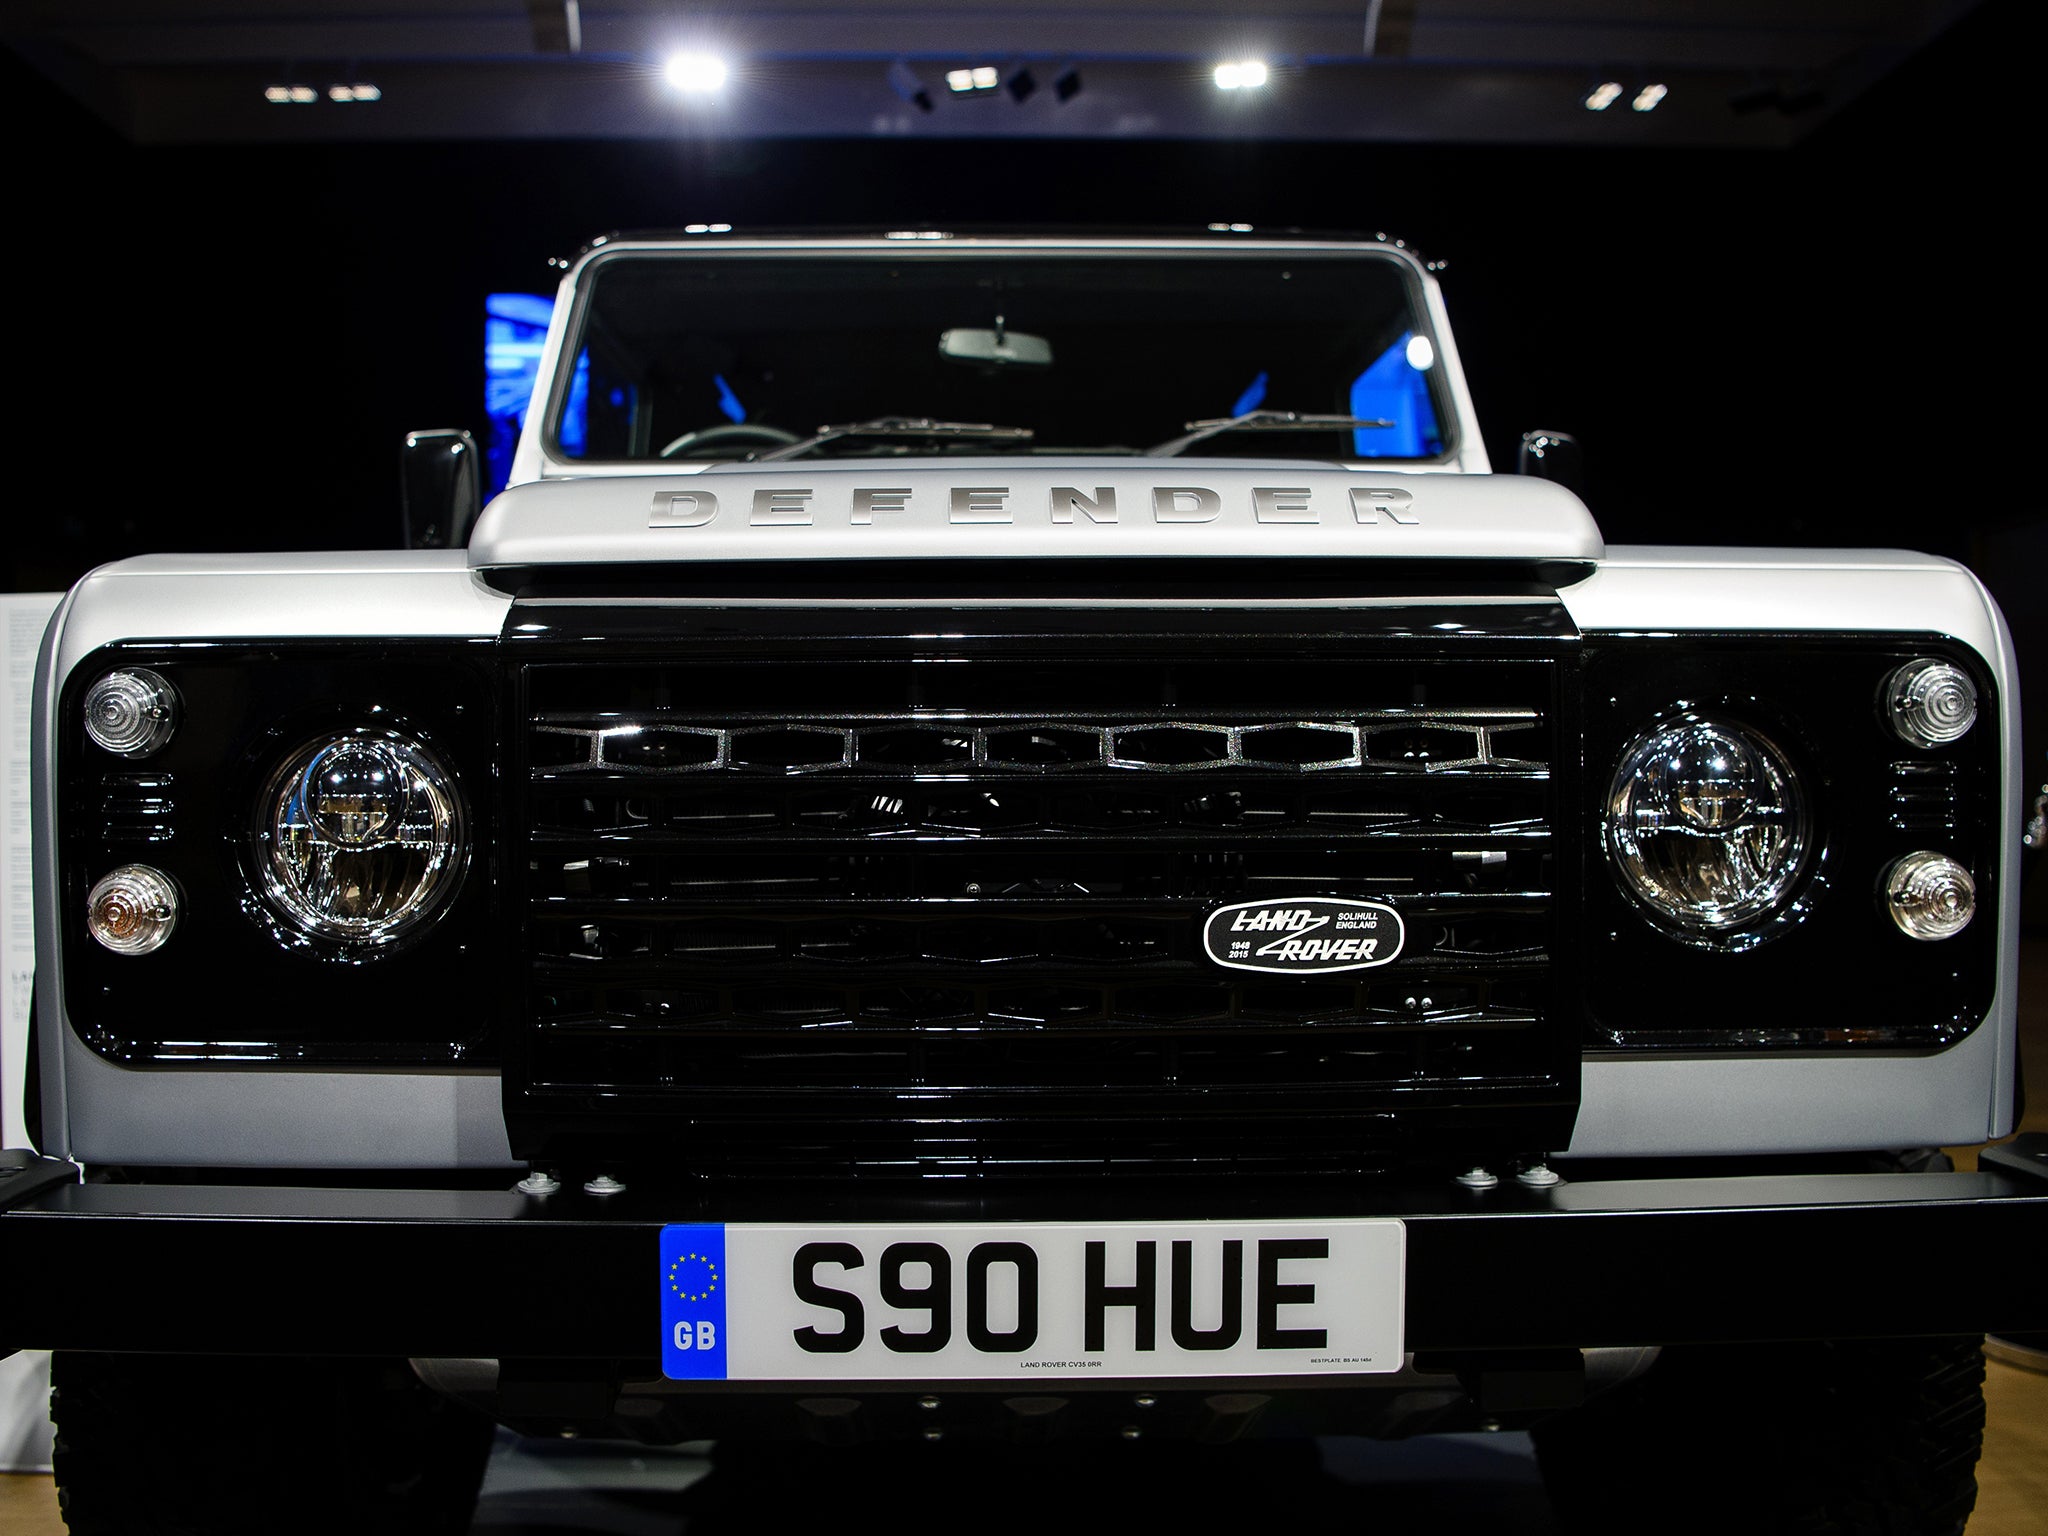 The two-millionth Land Rover Defender sold for £400,000 at auction